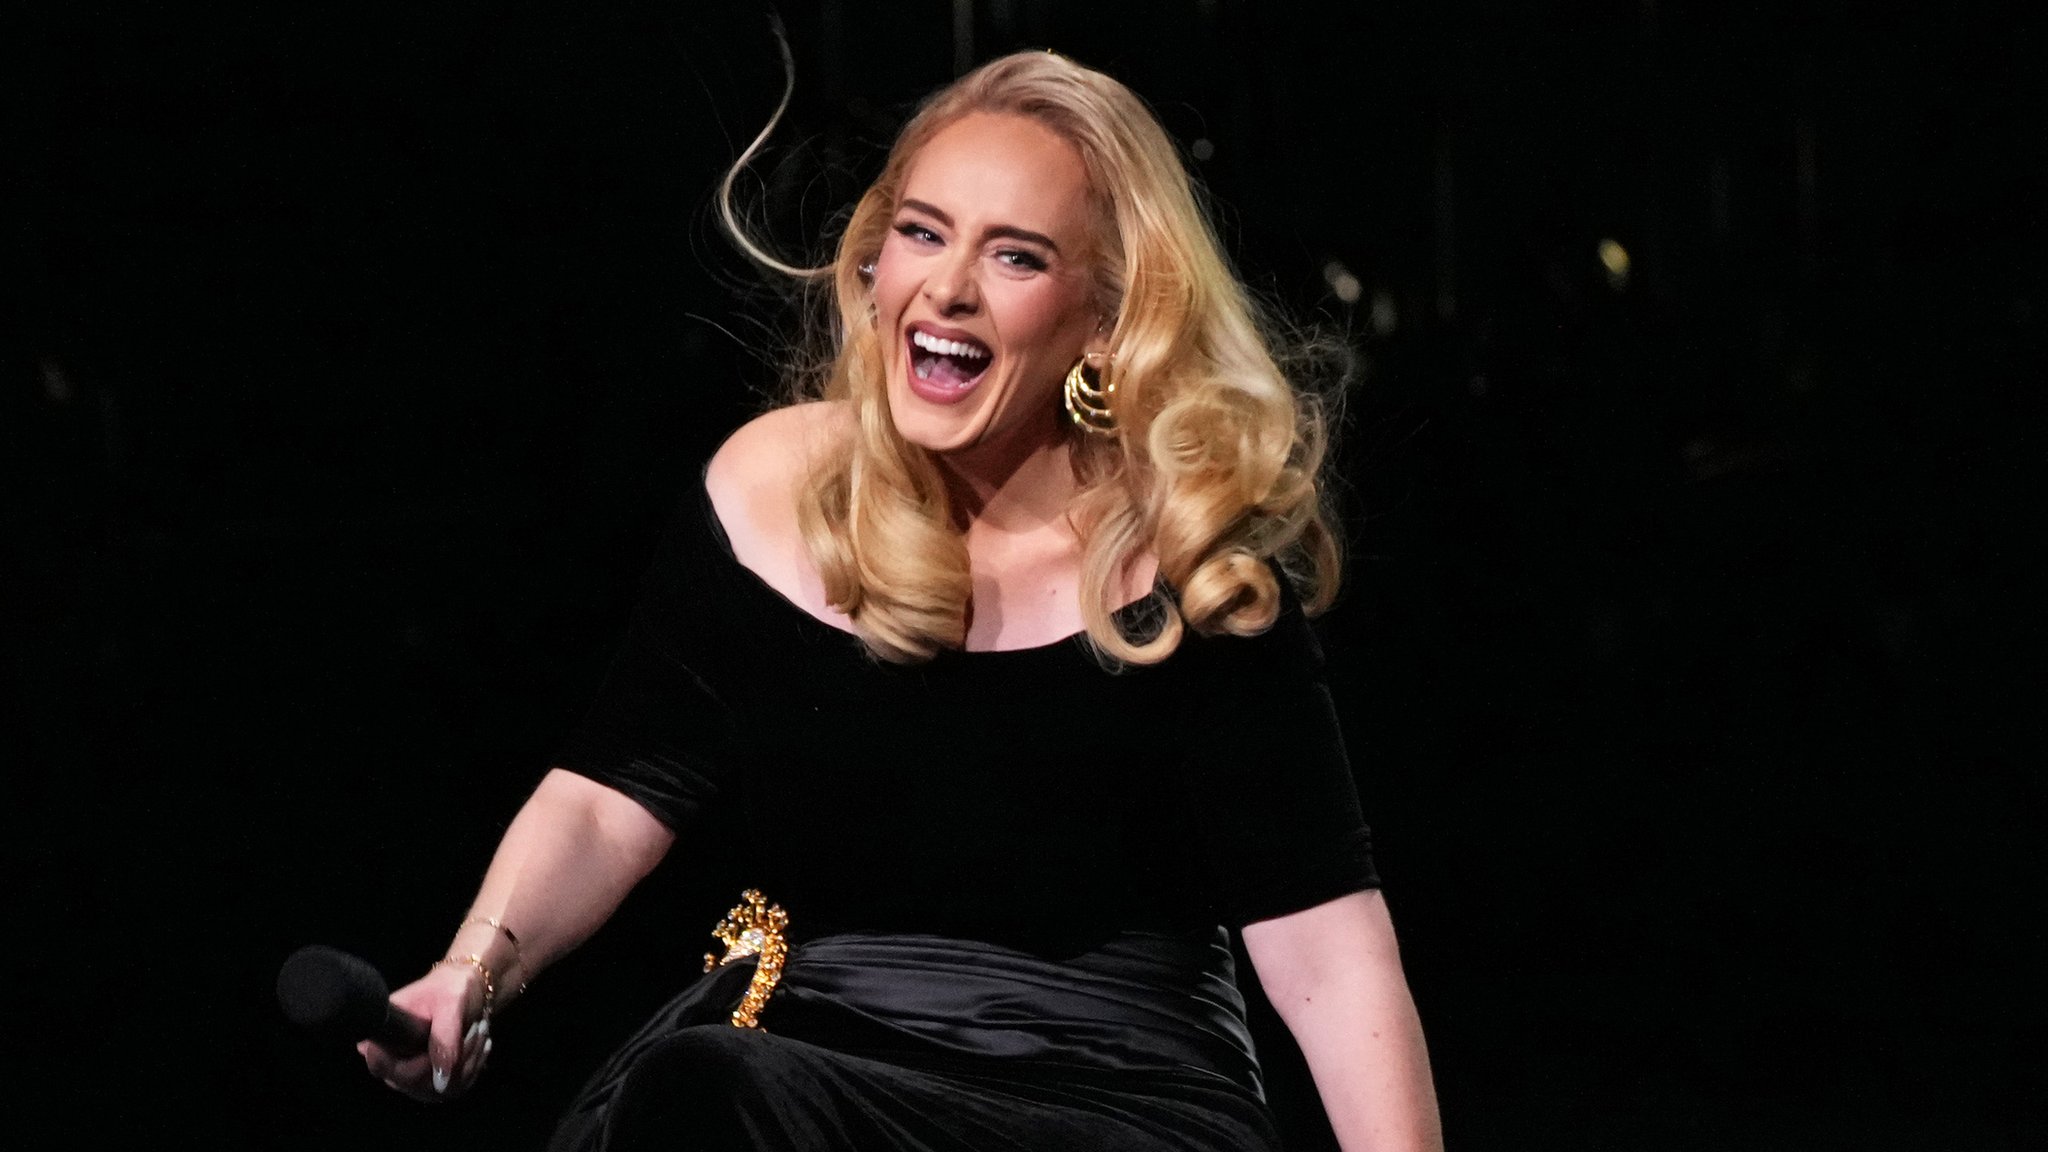 Adele wearing a black dress while holding a mic